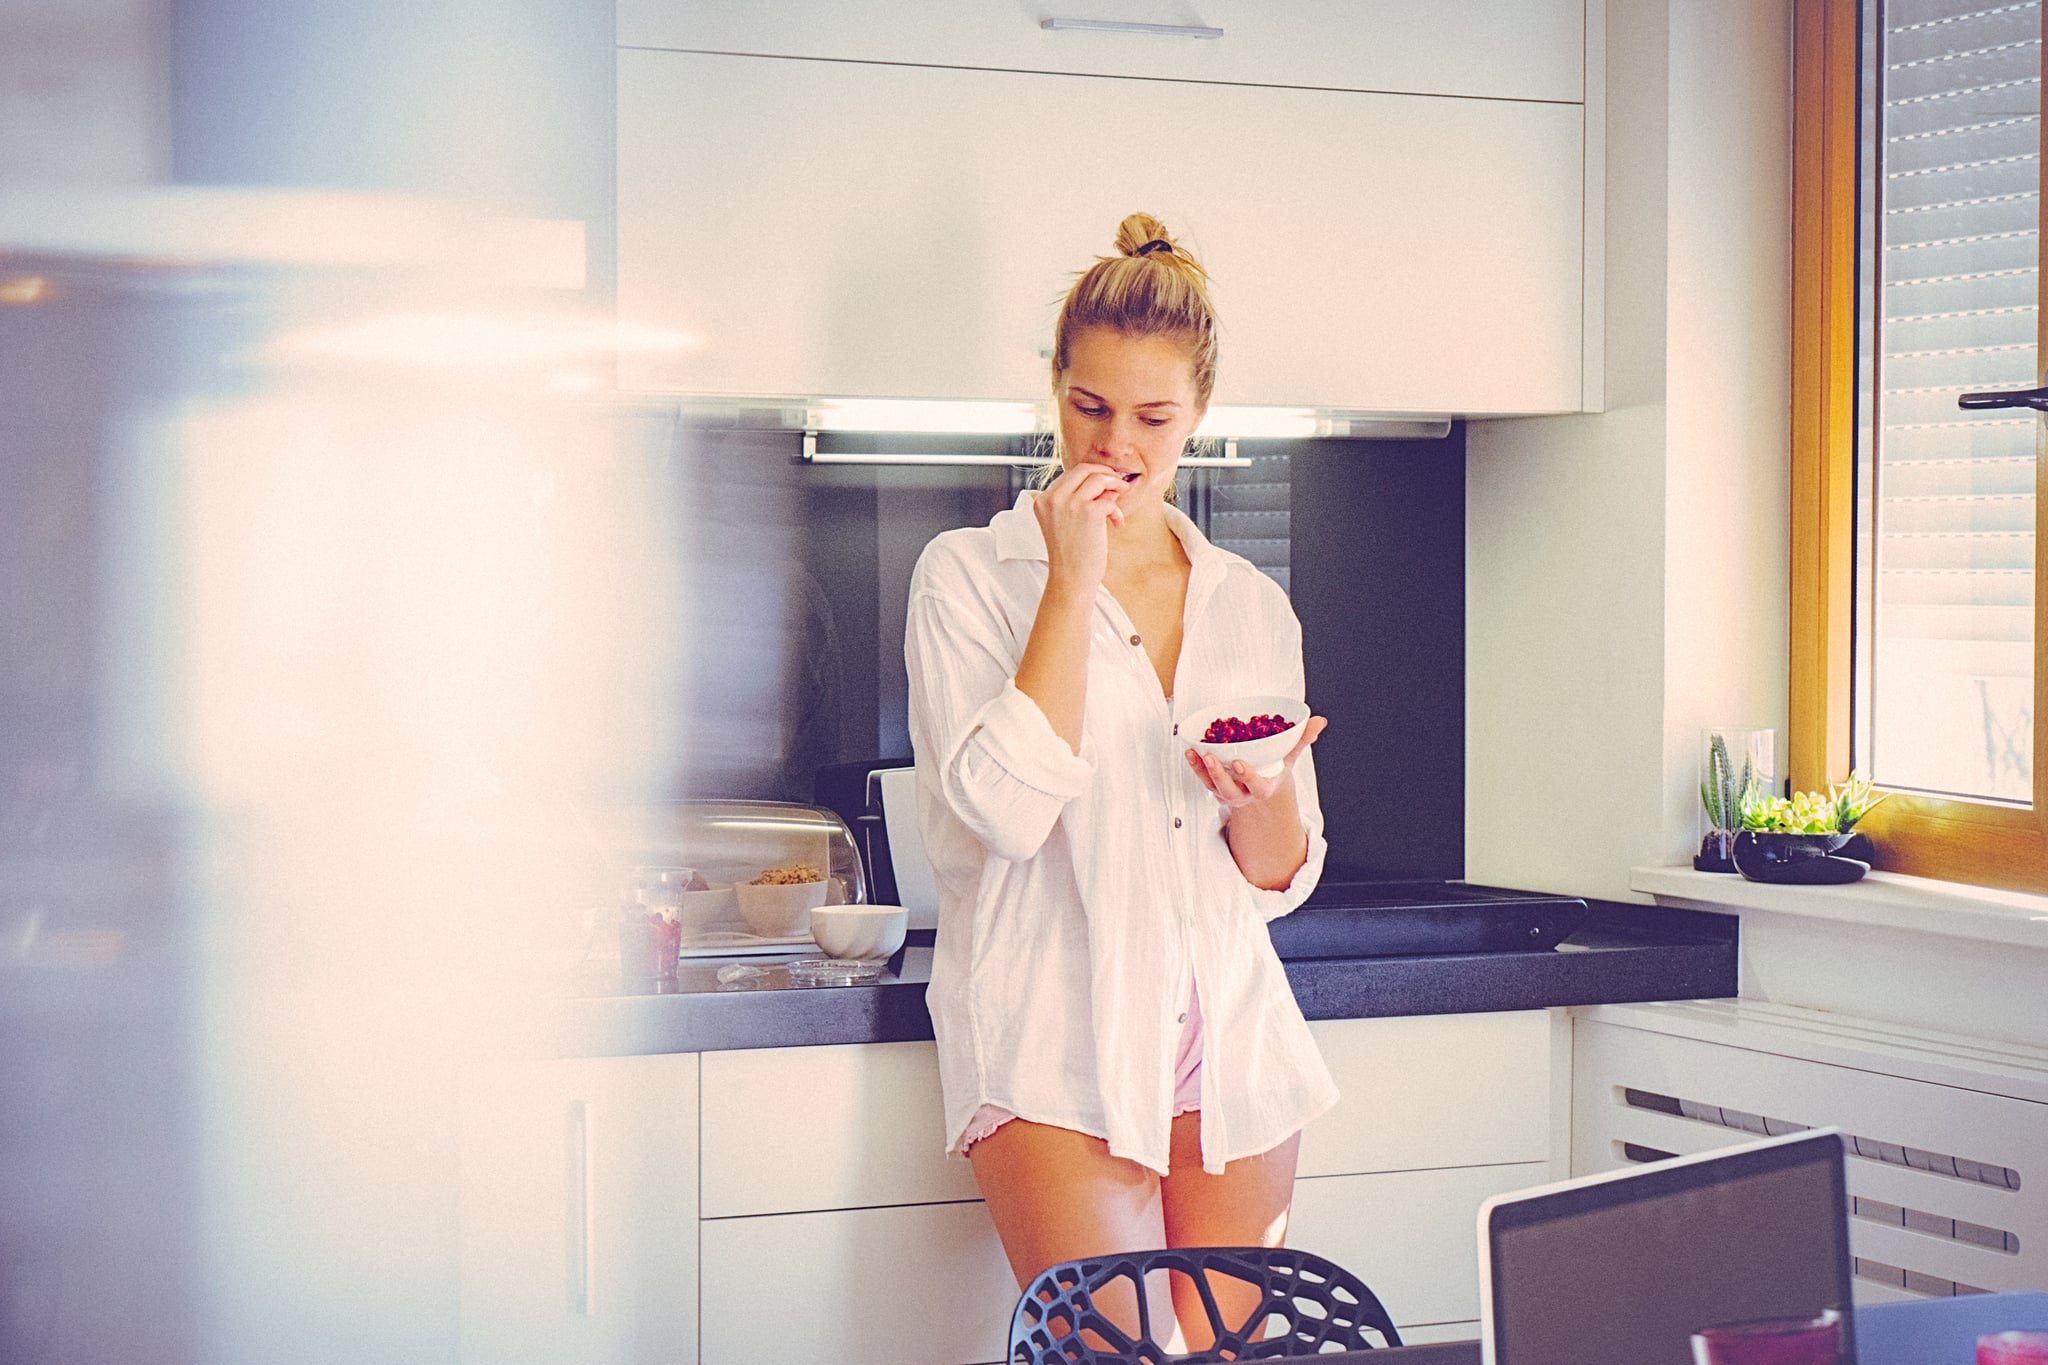 Attractive blonde woman in the morning, at home in the kitchen, eating pomegranate. The woman is dressed in pajamas and it seems that she recently got out of the bed and started to prepare breakfast. Her long blonde hair is swept back from her face. She seems sleepy. The shot is executed with available natural light, and the copy space has been left. Shallow DOF. Soft focused.